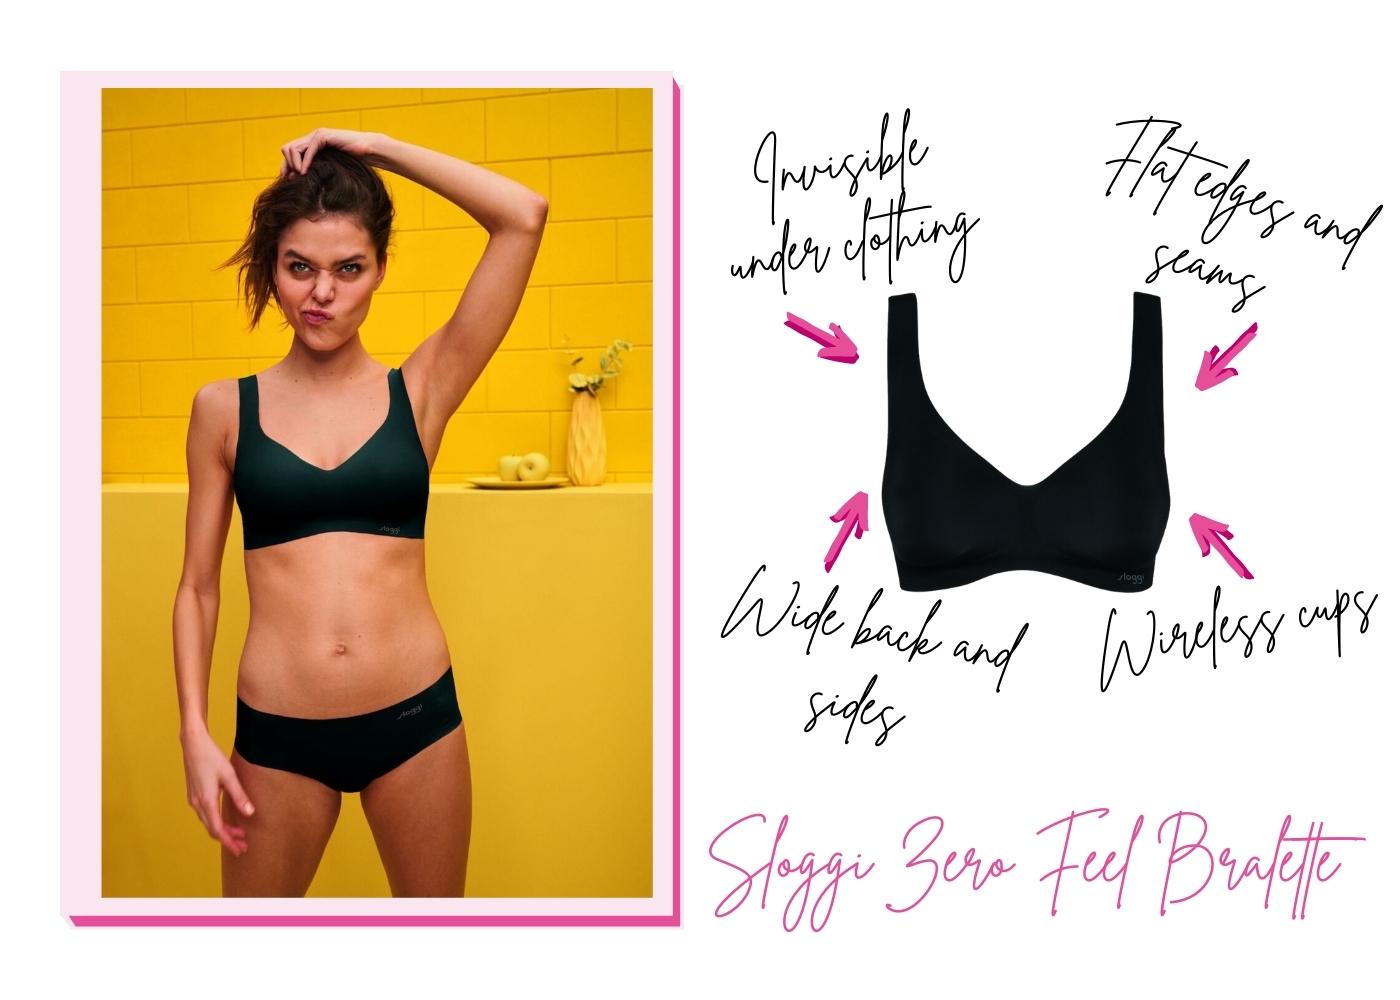 How Lingerie Can Improve Mental Health?